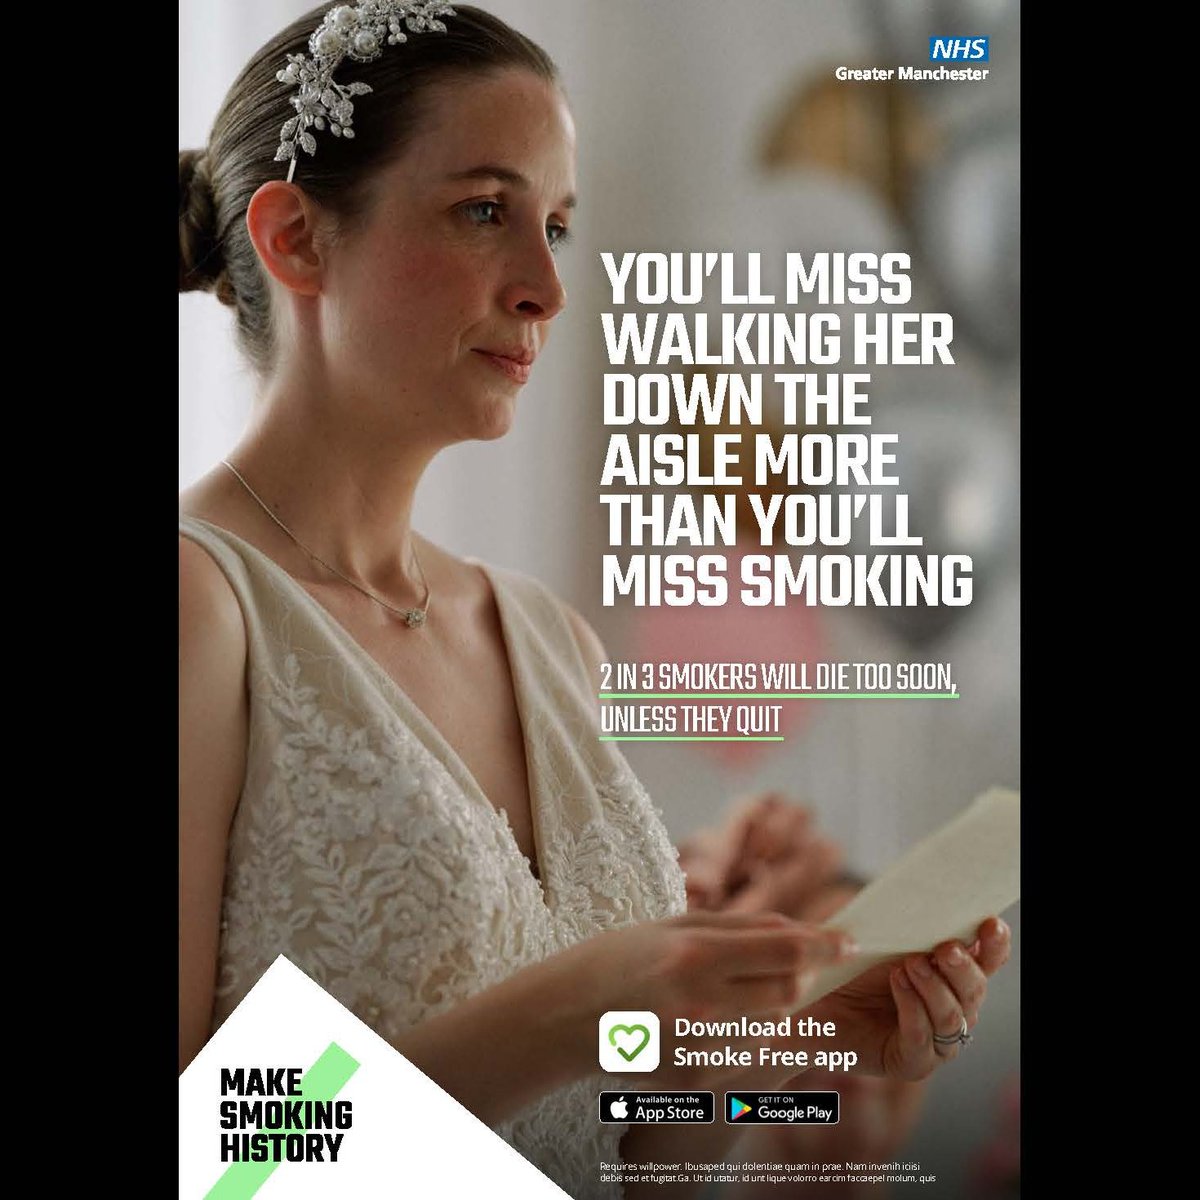 Delighted that NHS Greater Manchester as part of Greater Manchester Integrated Care Partnership 'Make Smoking History' has launched a new hard-hitting campaign to help Mancunians to stop smoking, 'What Will You Miss?'  

#Makesmokinghistory #Whatwillyoumiss #thesmokefreeapp